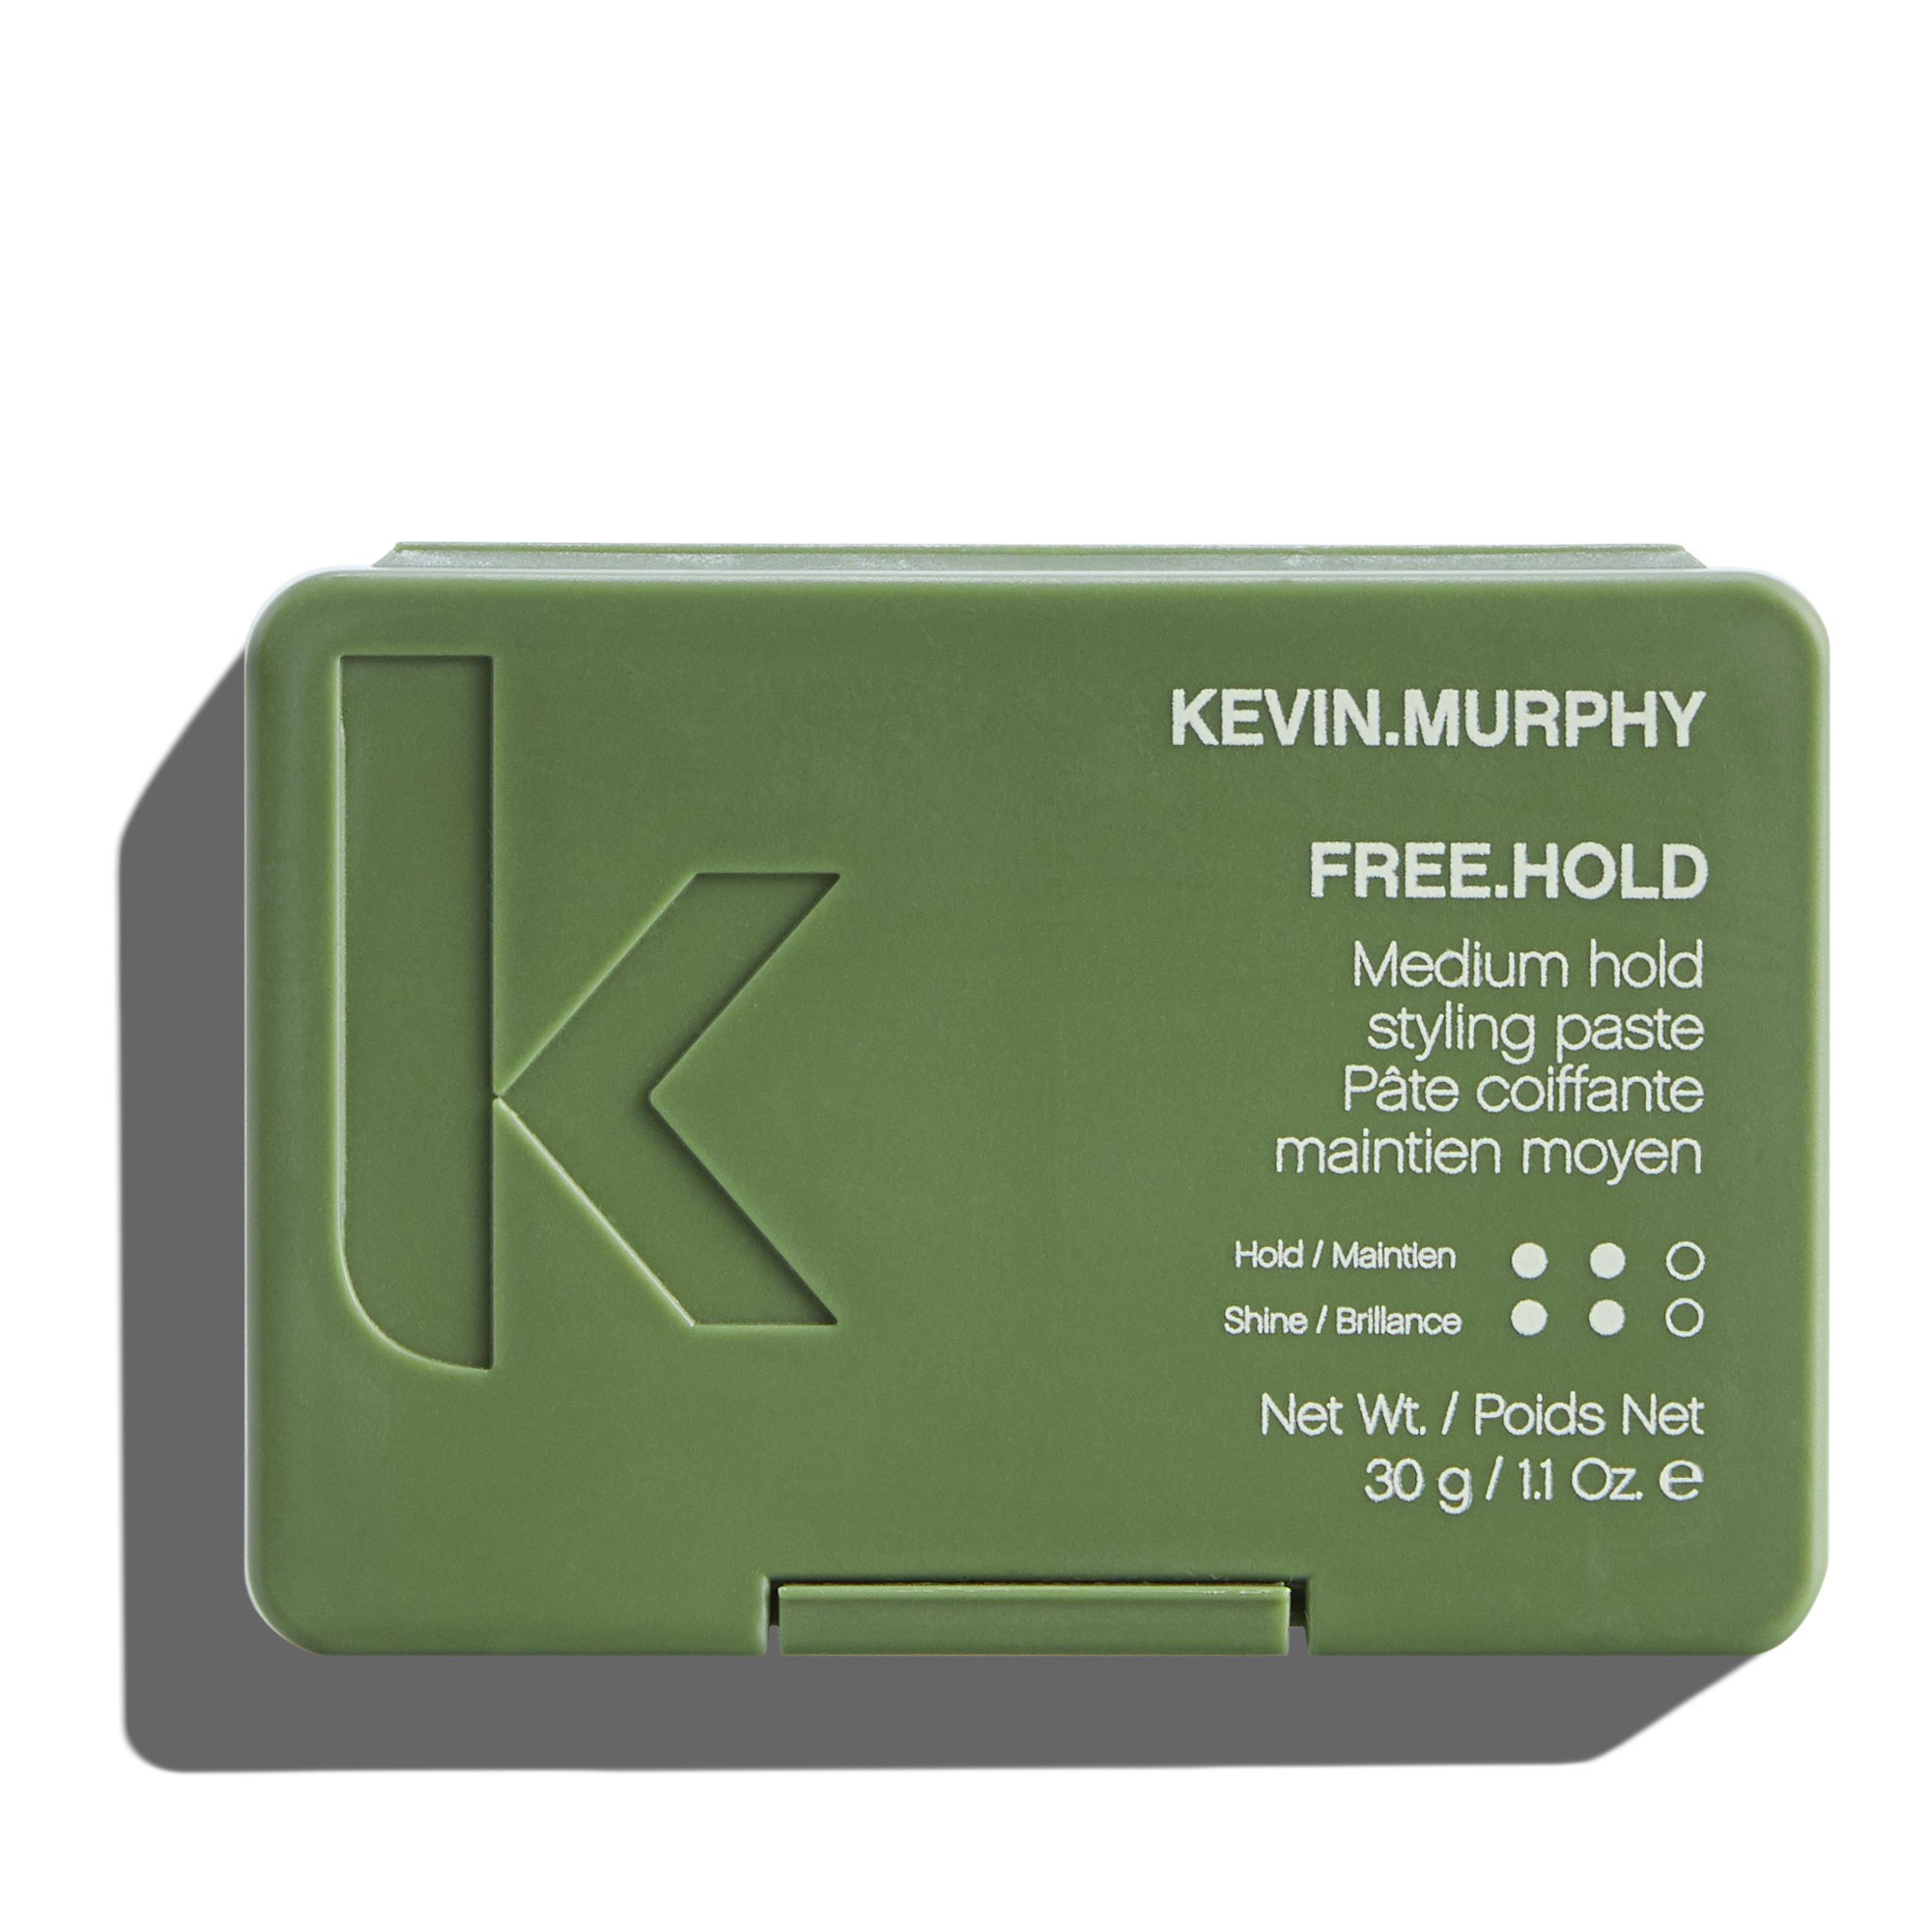 KEVIN.MURPHY For Men: FREE.HOLD 3.4oz